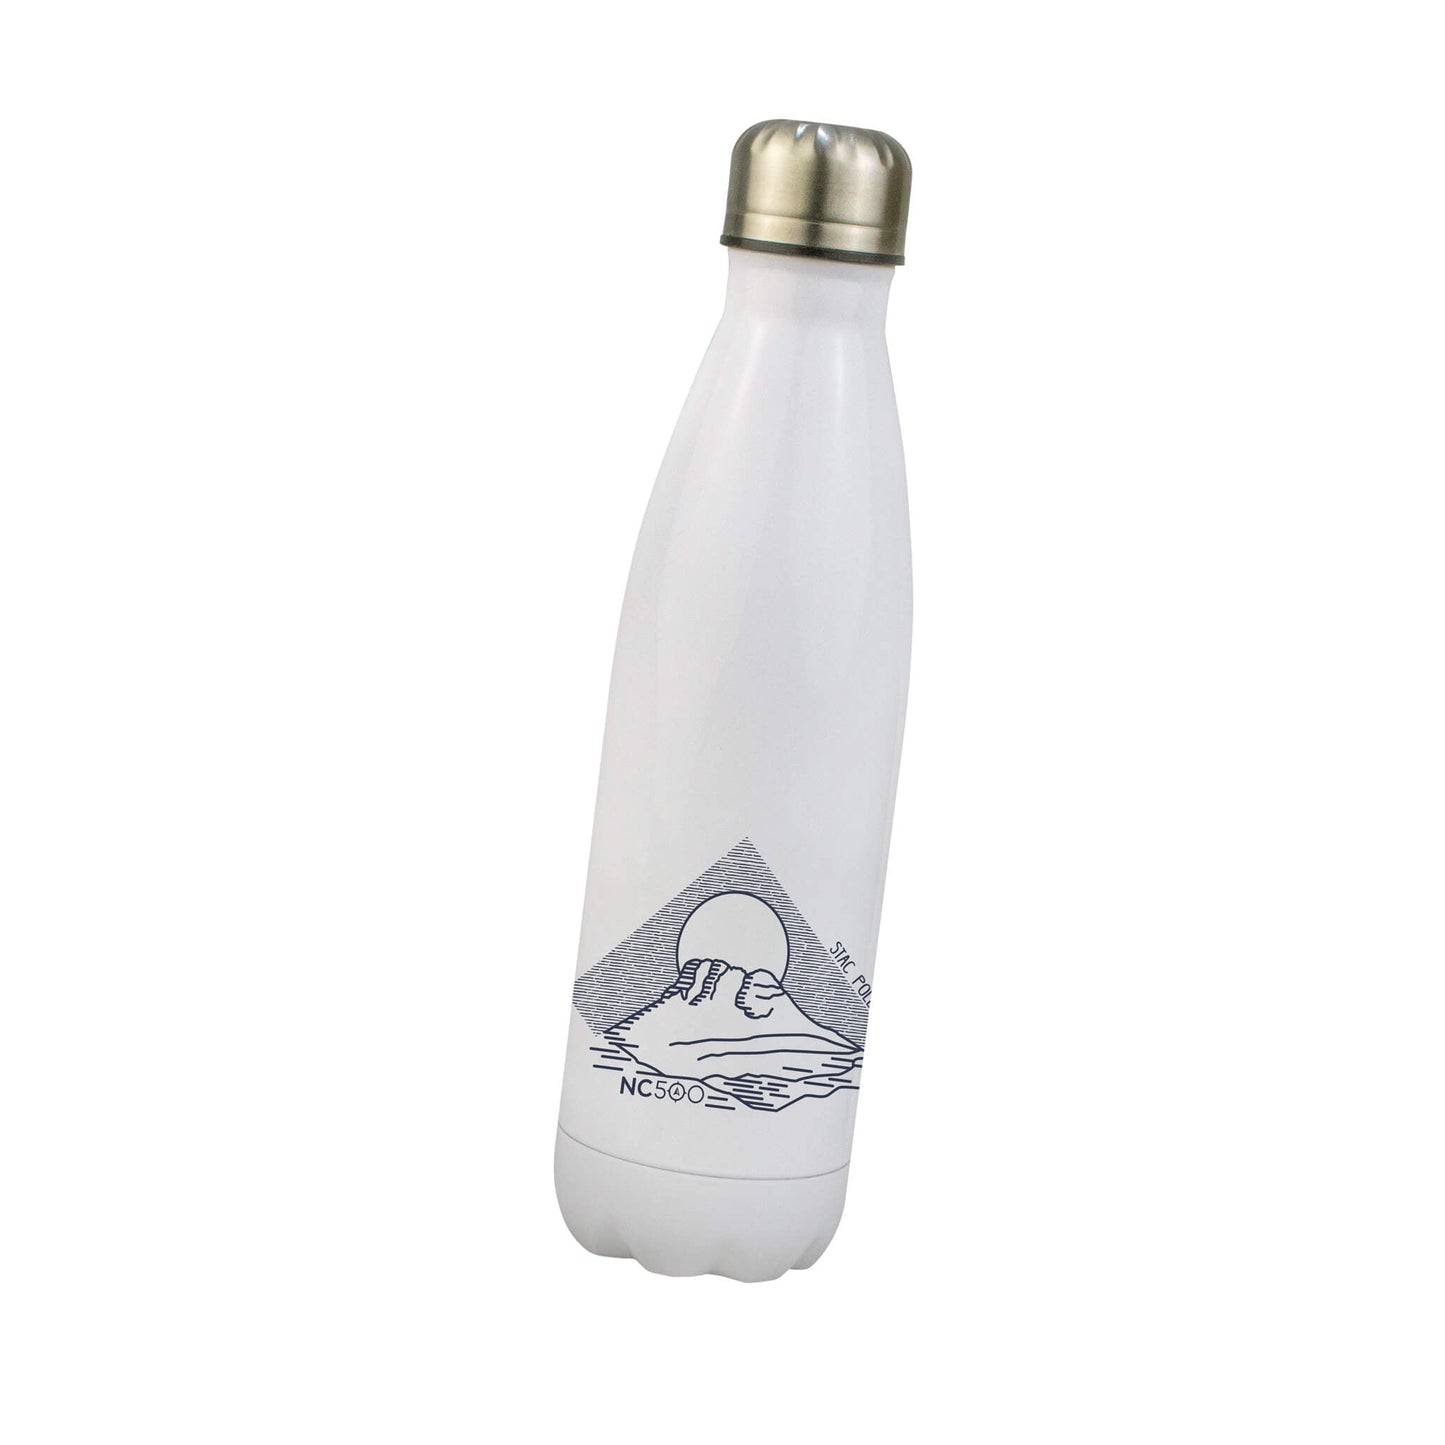 Mountain Stainless Steel Water Bottle - Stac Polliadh - White - North Coast 500